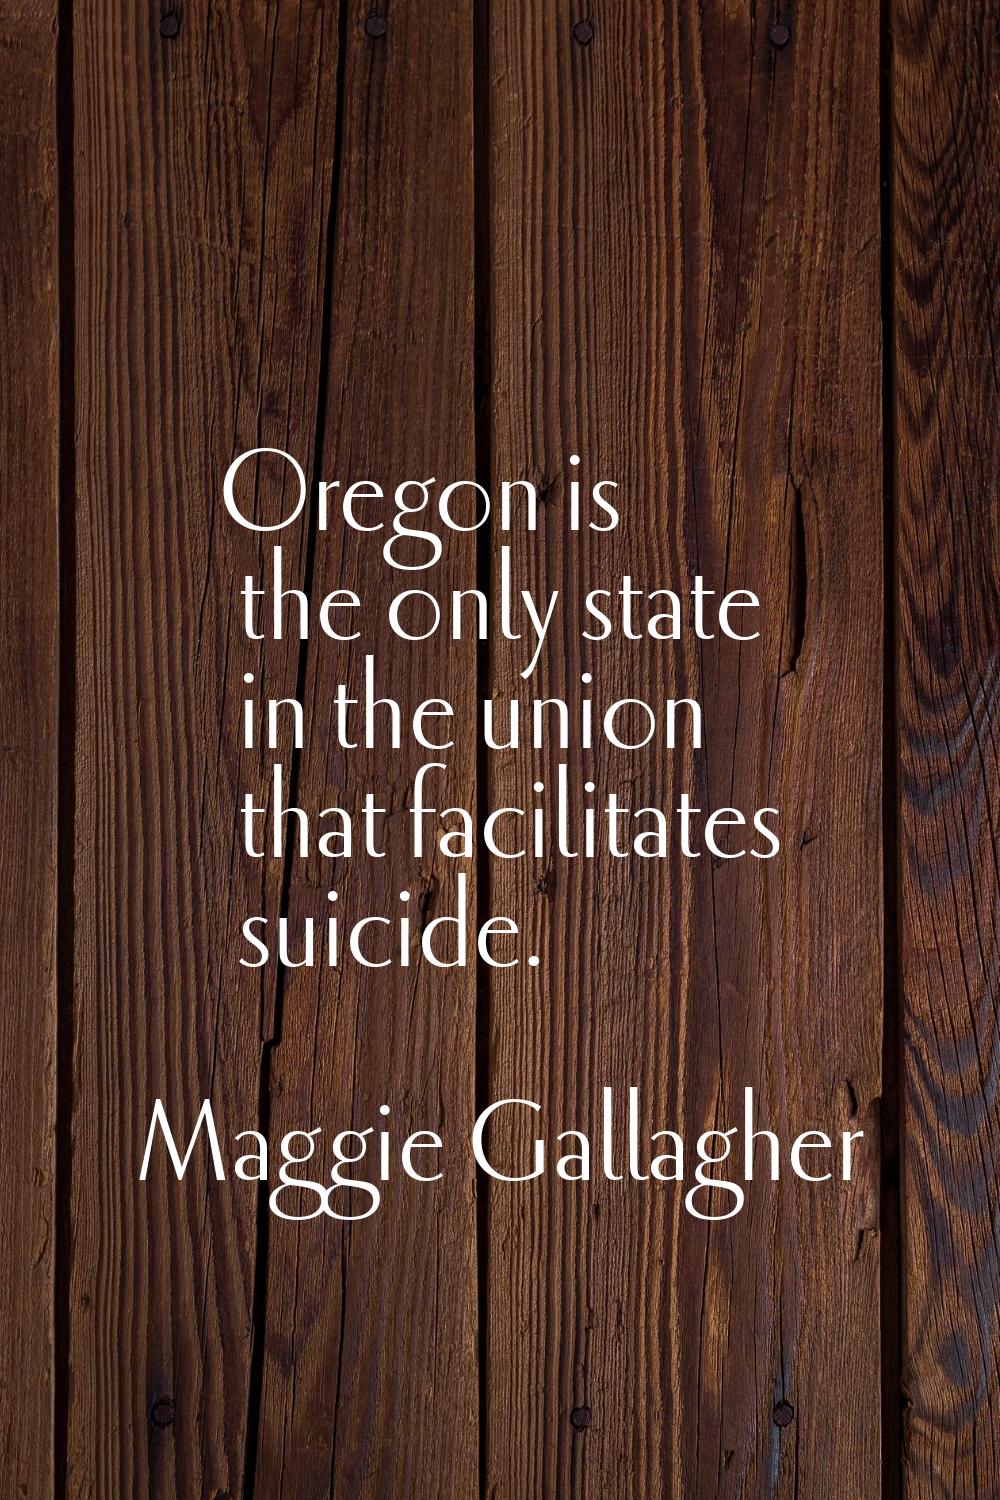 Oregon is the only state in the union that facilitates suicide.